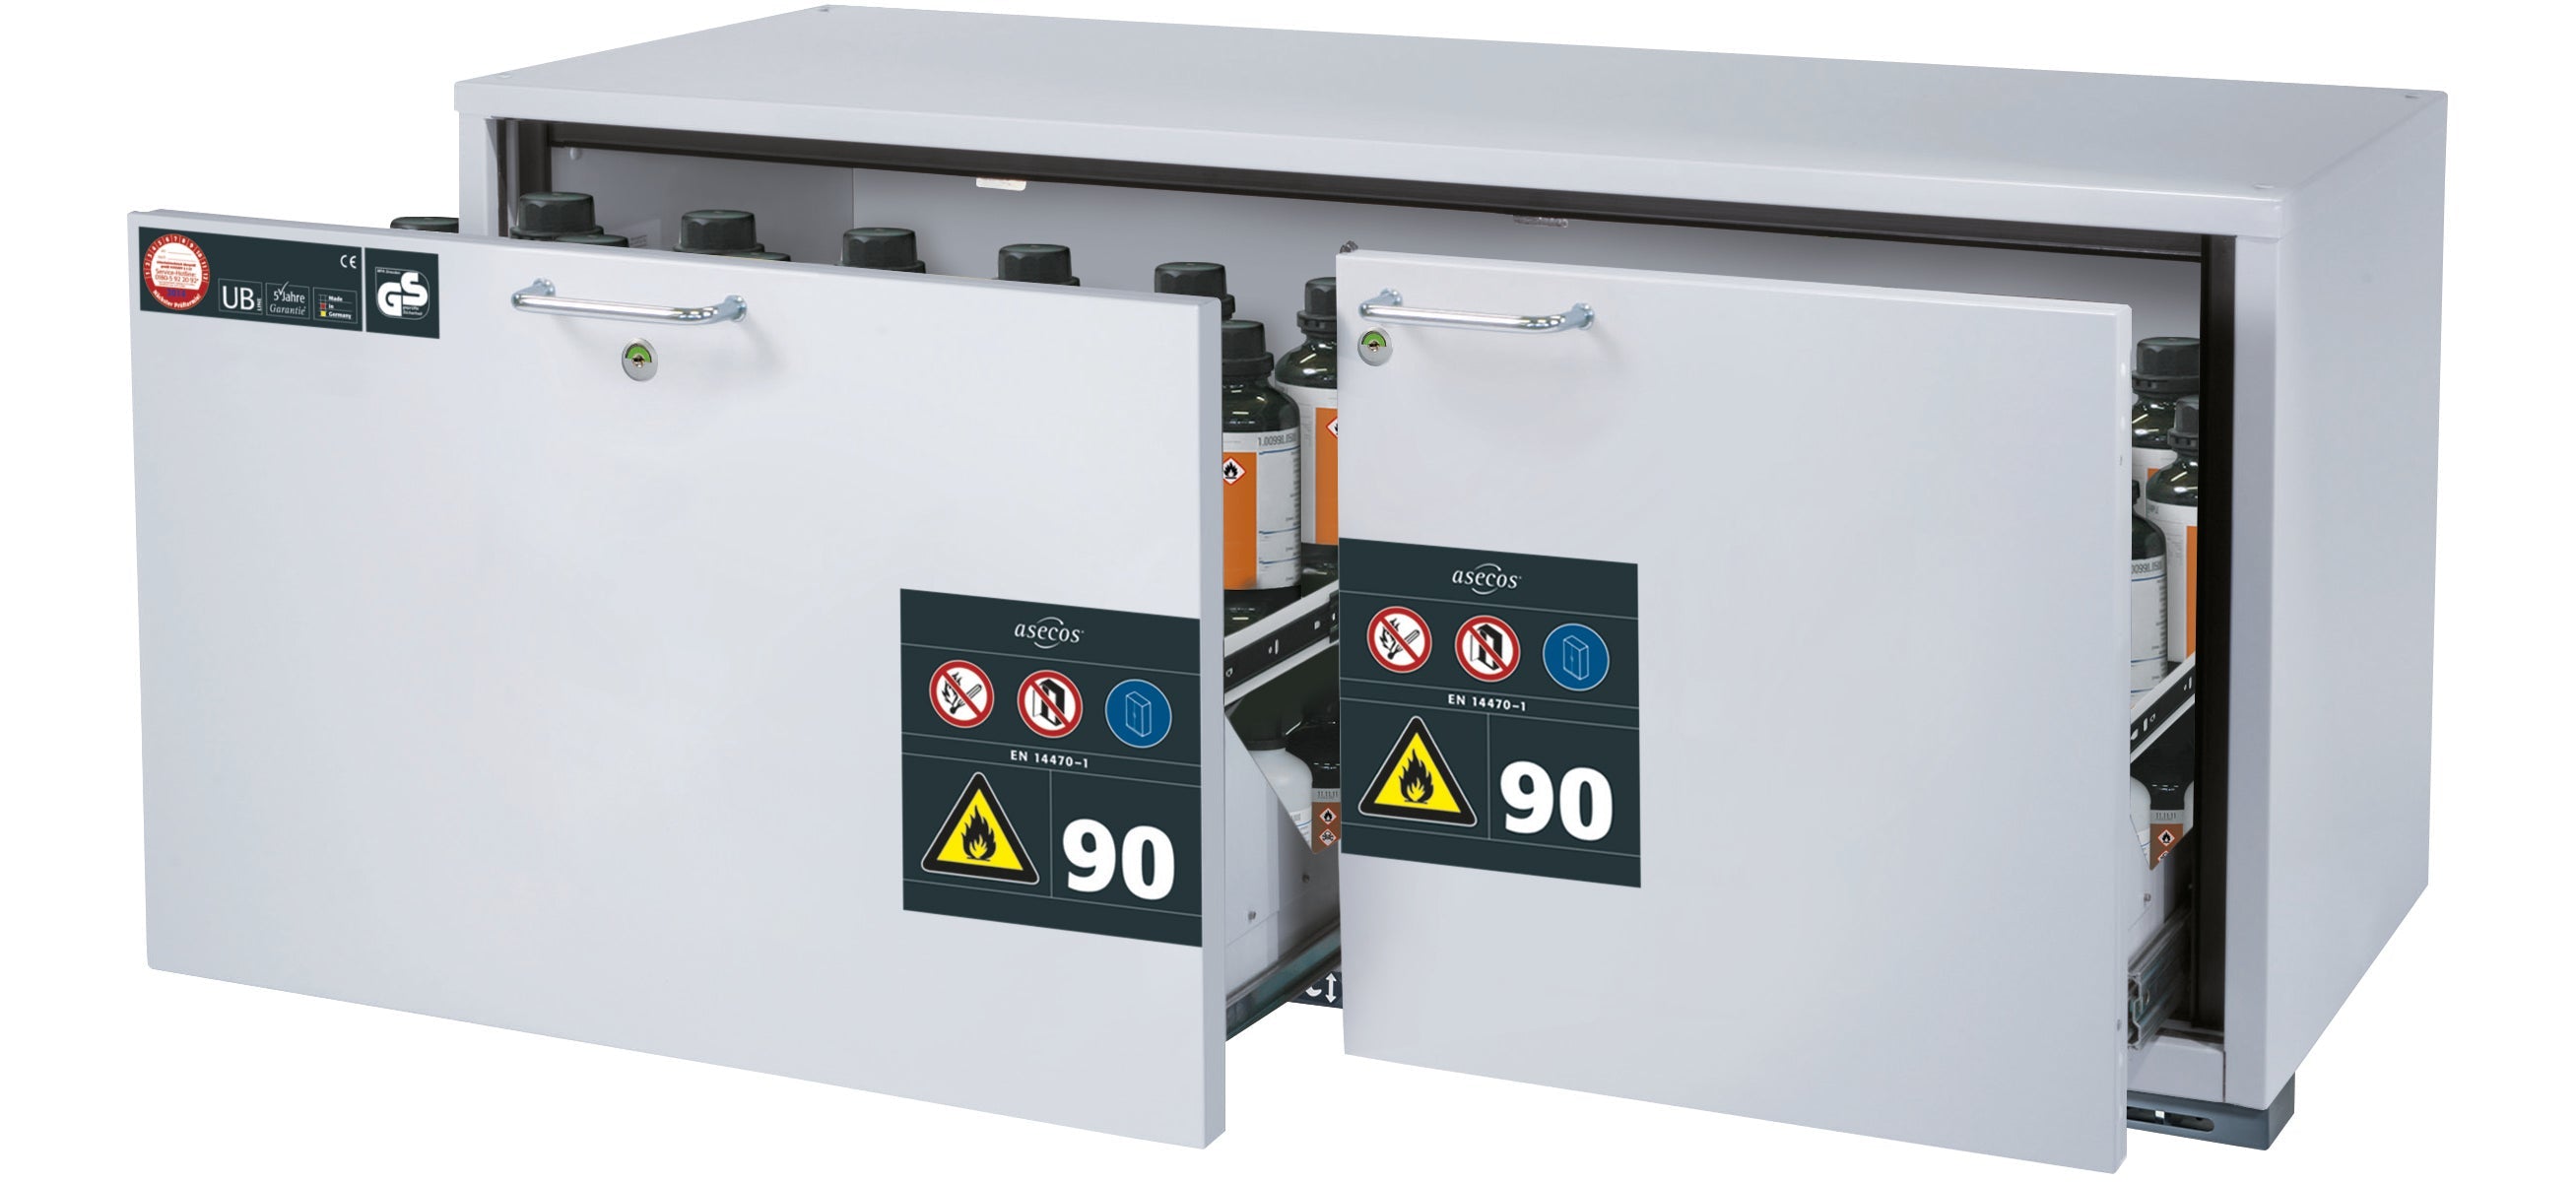 Type 90 safety base cabinet UB-S-90 model UB90.060.140.2S in light gray RAL 7035 with 2x drawer tray STAWA-R (sheet steel)